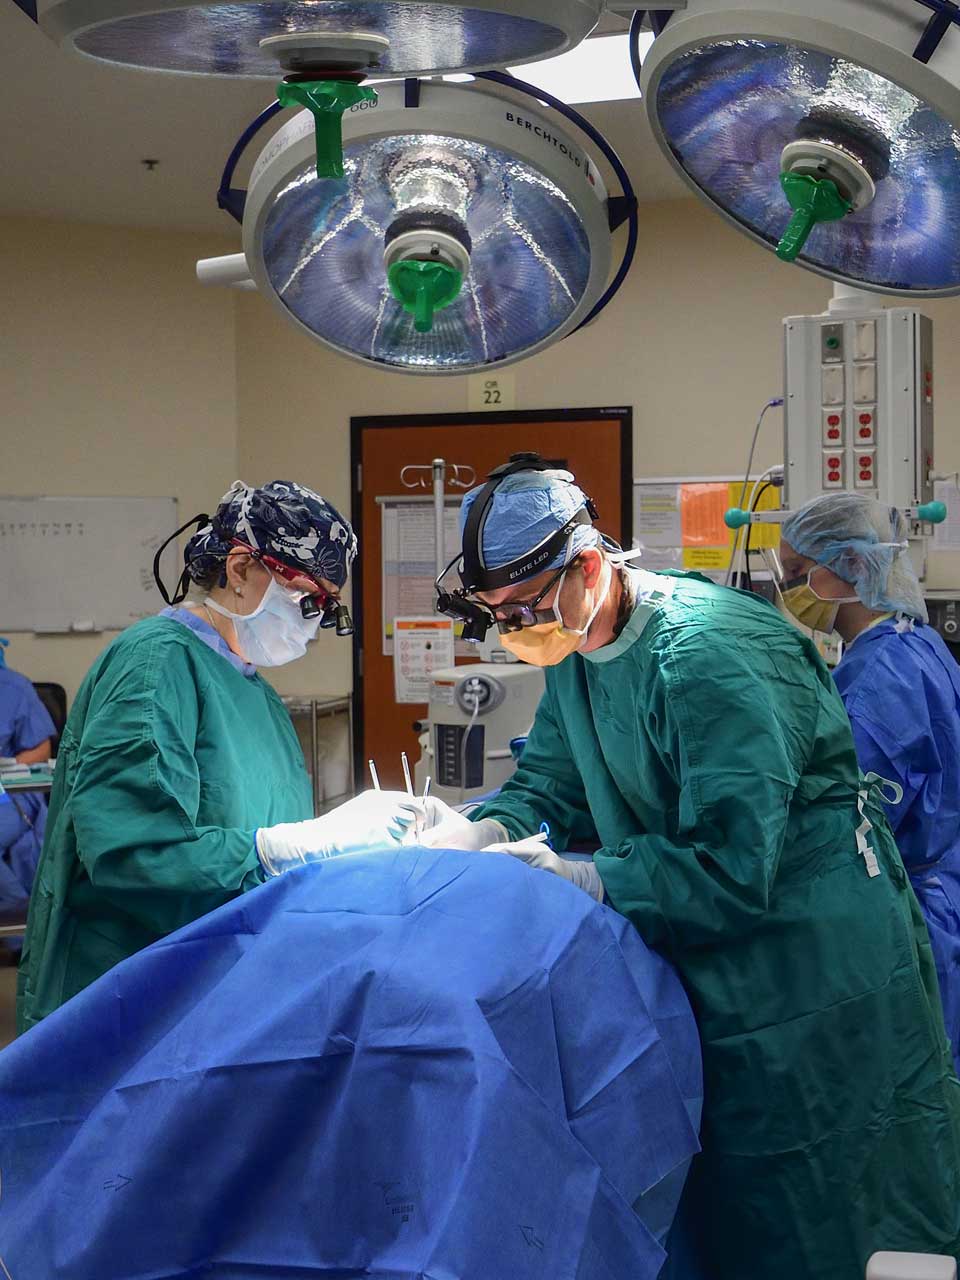 Surgical team in the operating room.